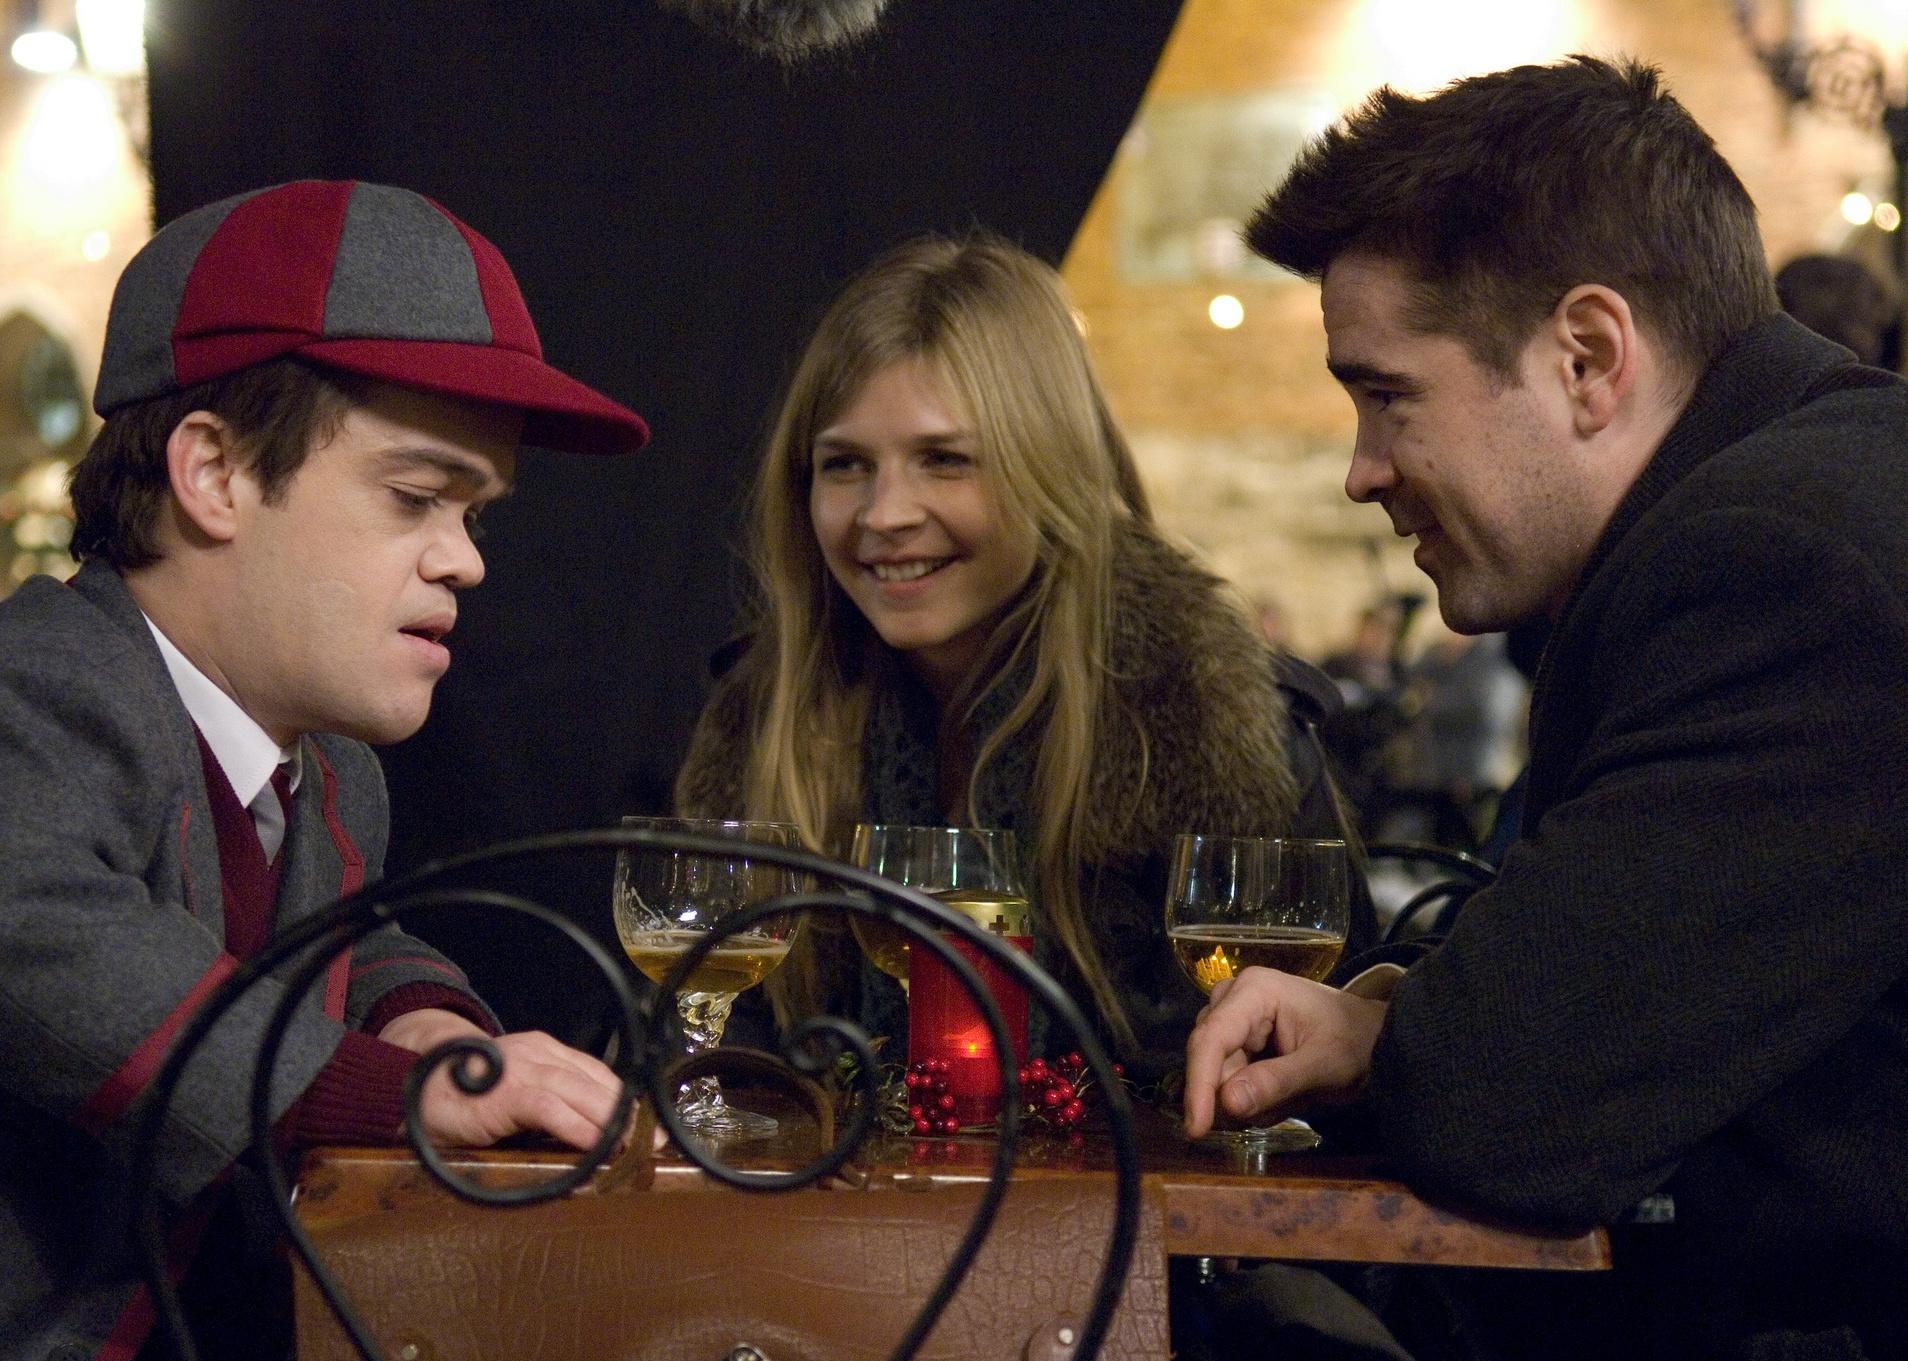 Colin Farrell having a beer with a man and woman.